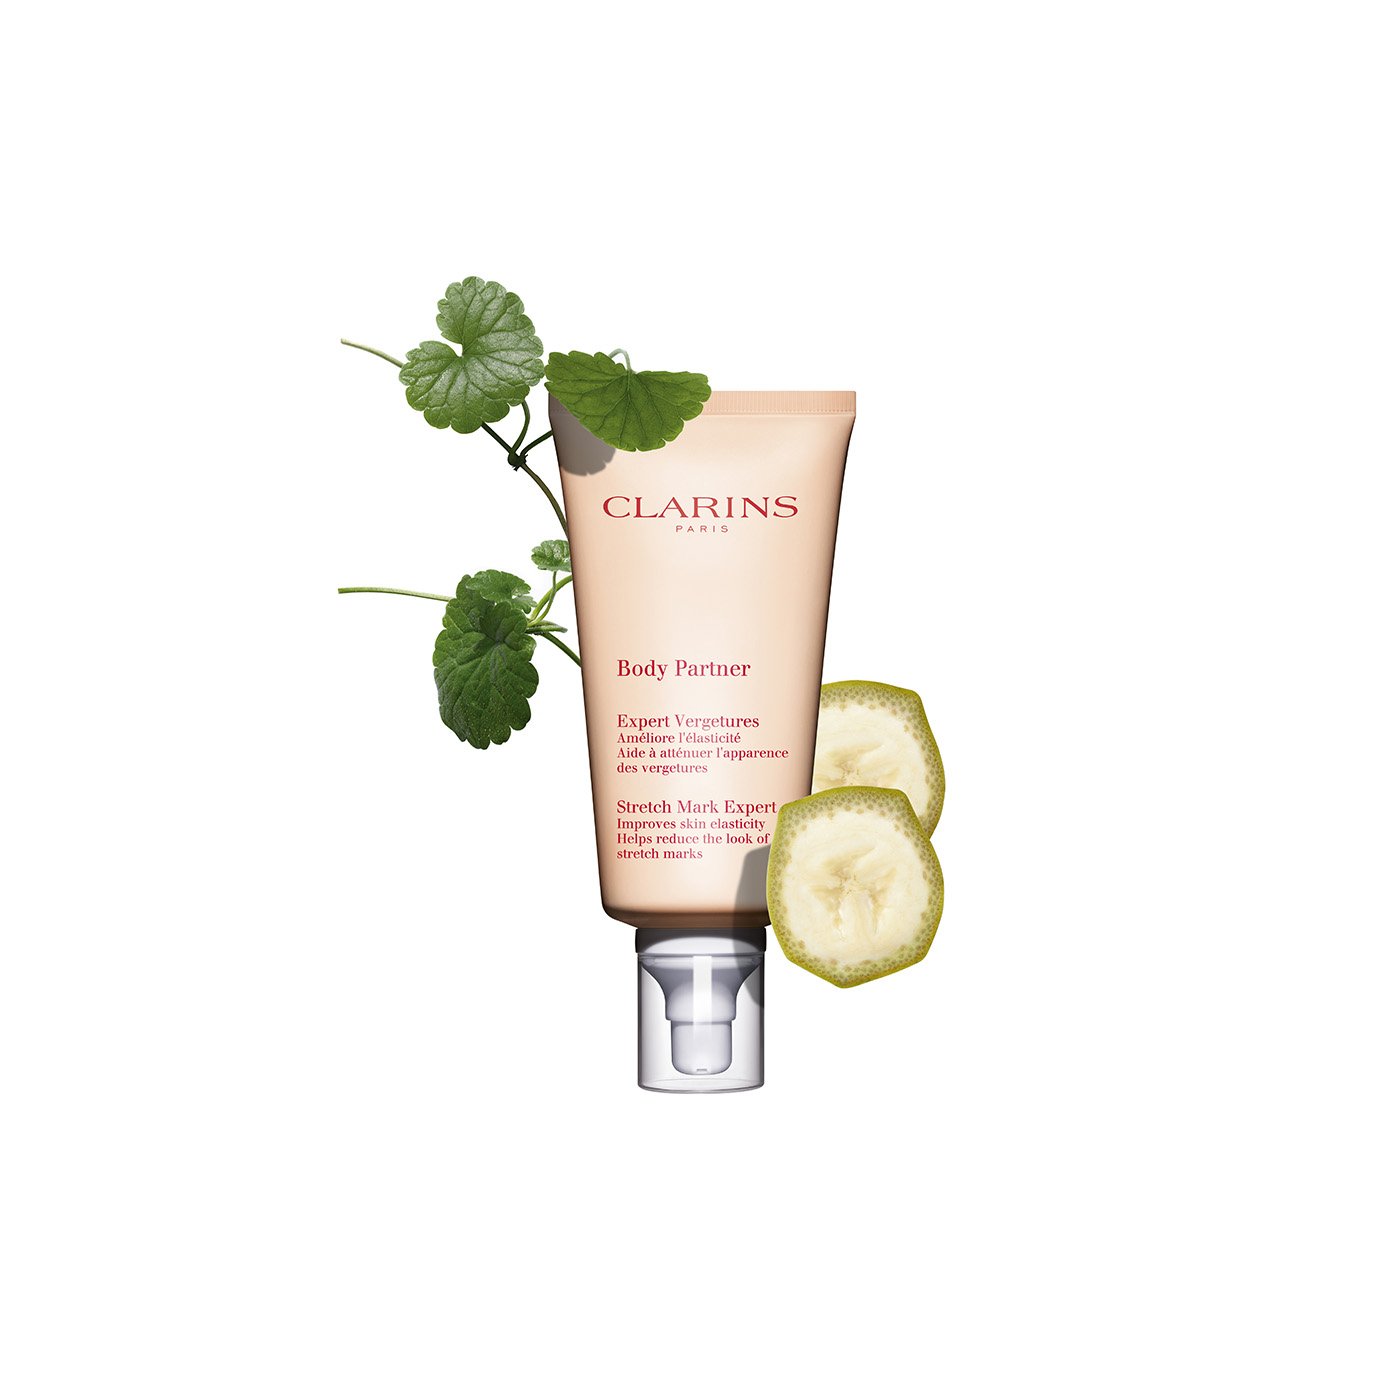 Targeted Body Contouring for your Best Looking Body—Clarins